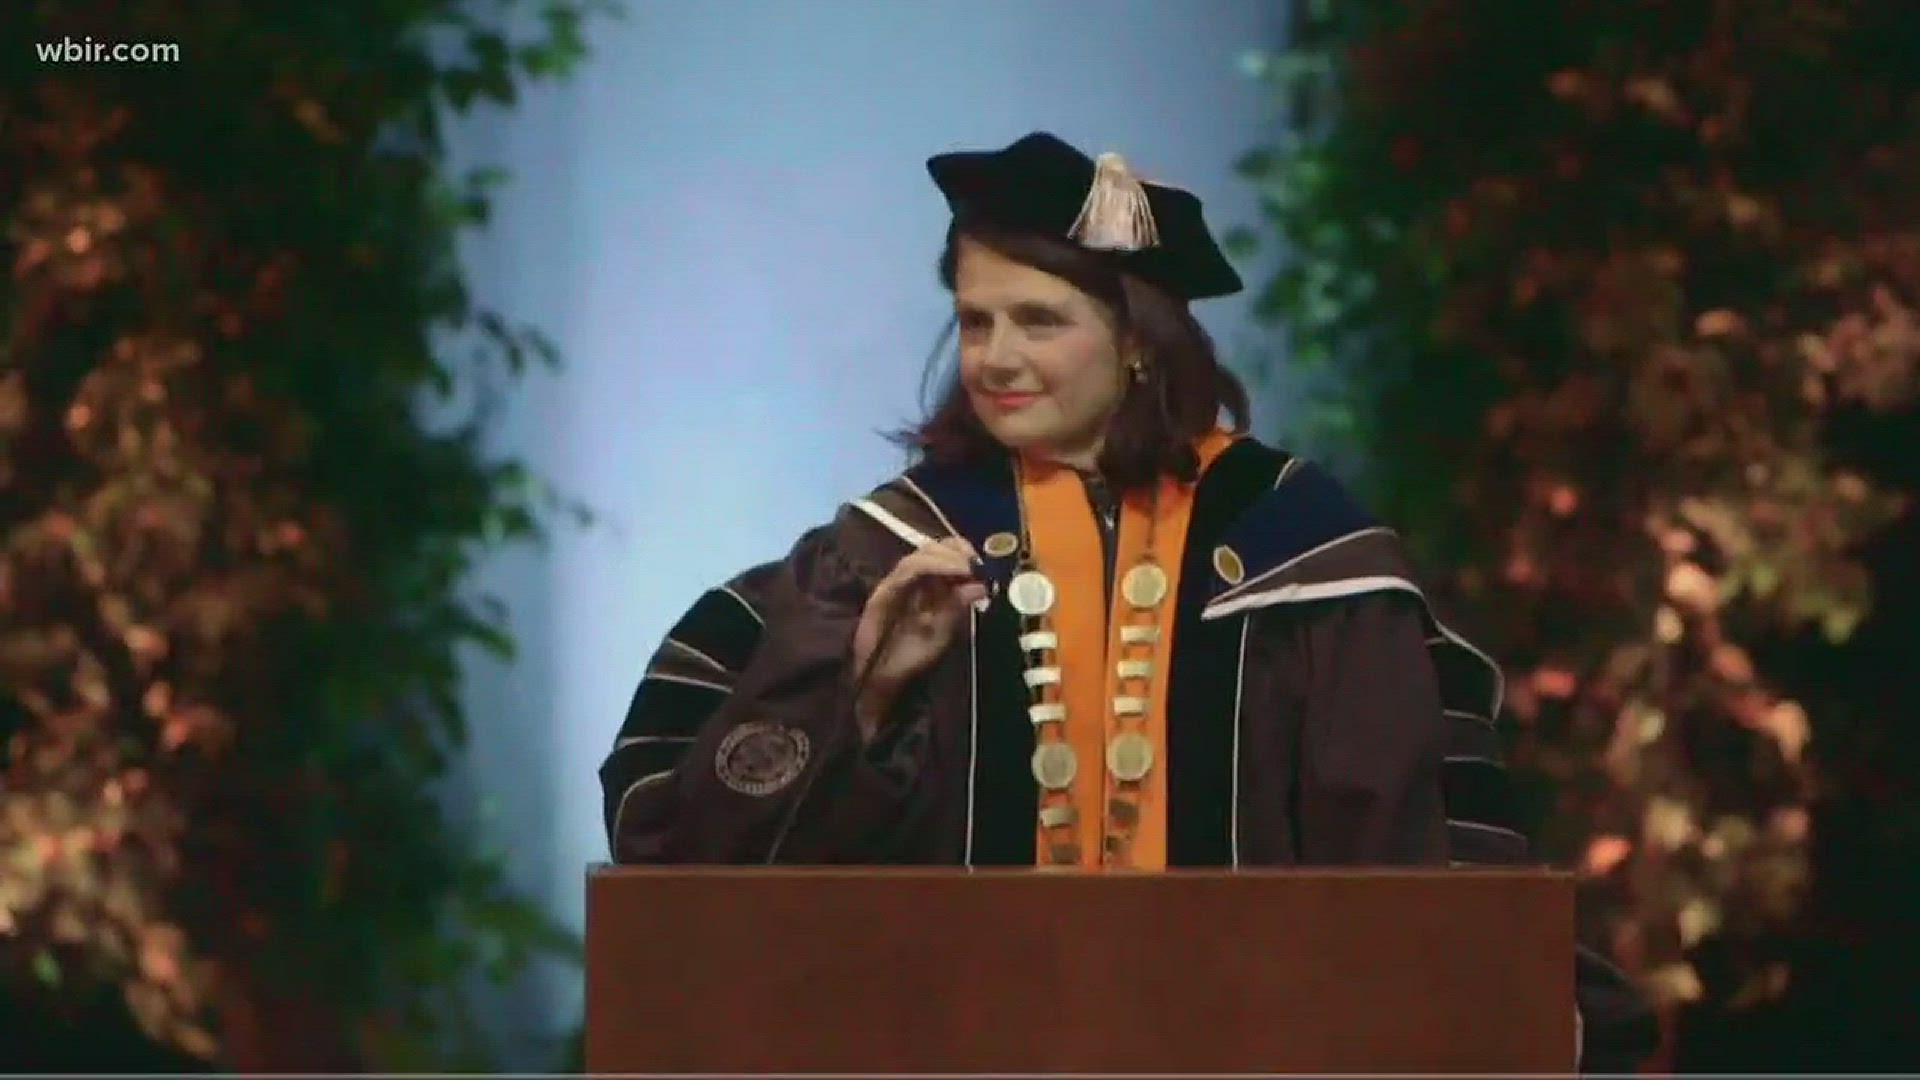 Oct. 13, 2017: UT formally welcomed Chancellor Beverly Davenport in an "investiture" ceremony.